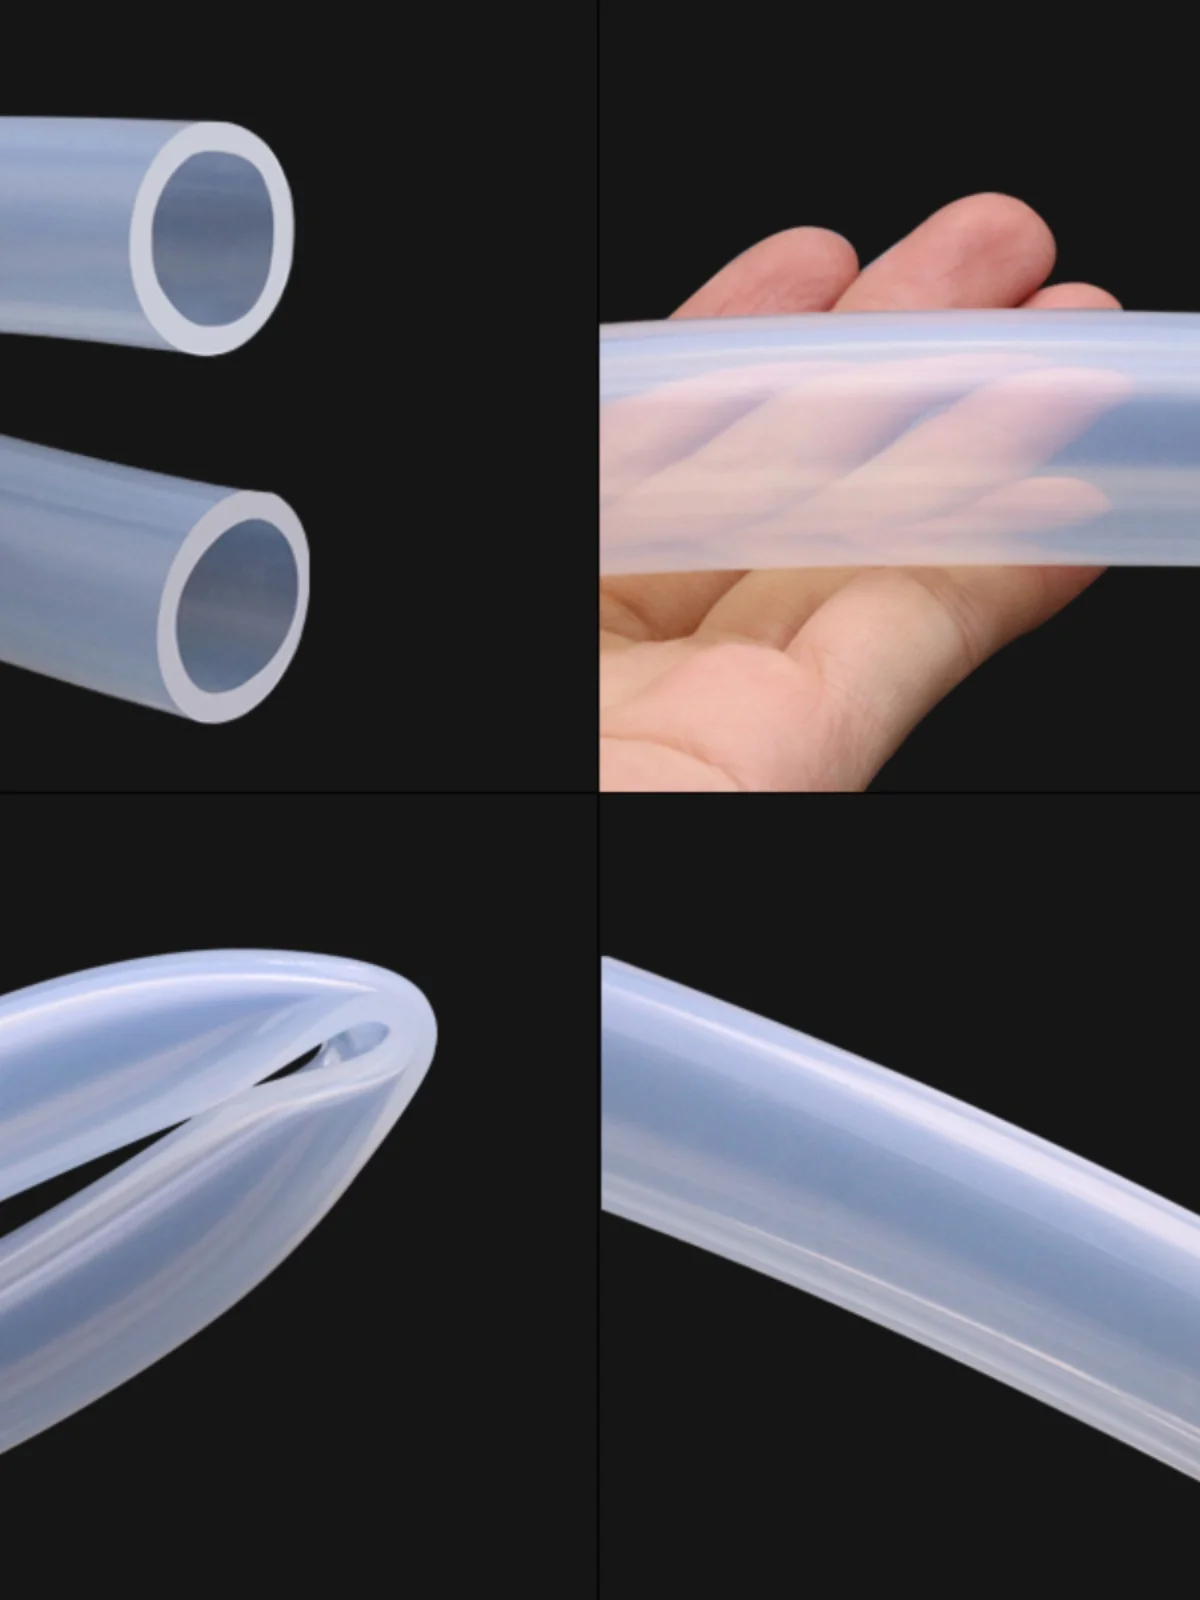 1M Food Grade Silicone Rubber Hose Transparent Flexible Silicone Tube Diameter 0.5 1 1.5 2 2.5 3 4 5 6 7 8  10  12 mm Clear Tube flexible 1 meter food grade translucent silicone tube clear gel dia 1 2 3 4 5 6 7 8 mm beer milk rubber hose pipe soft 1 m new